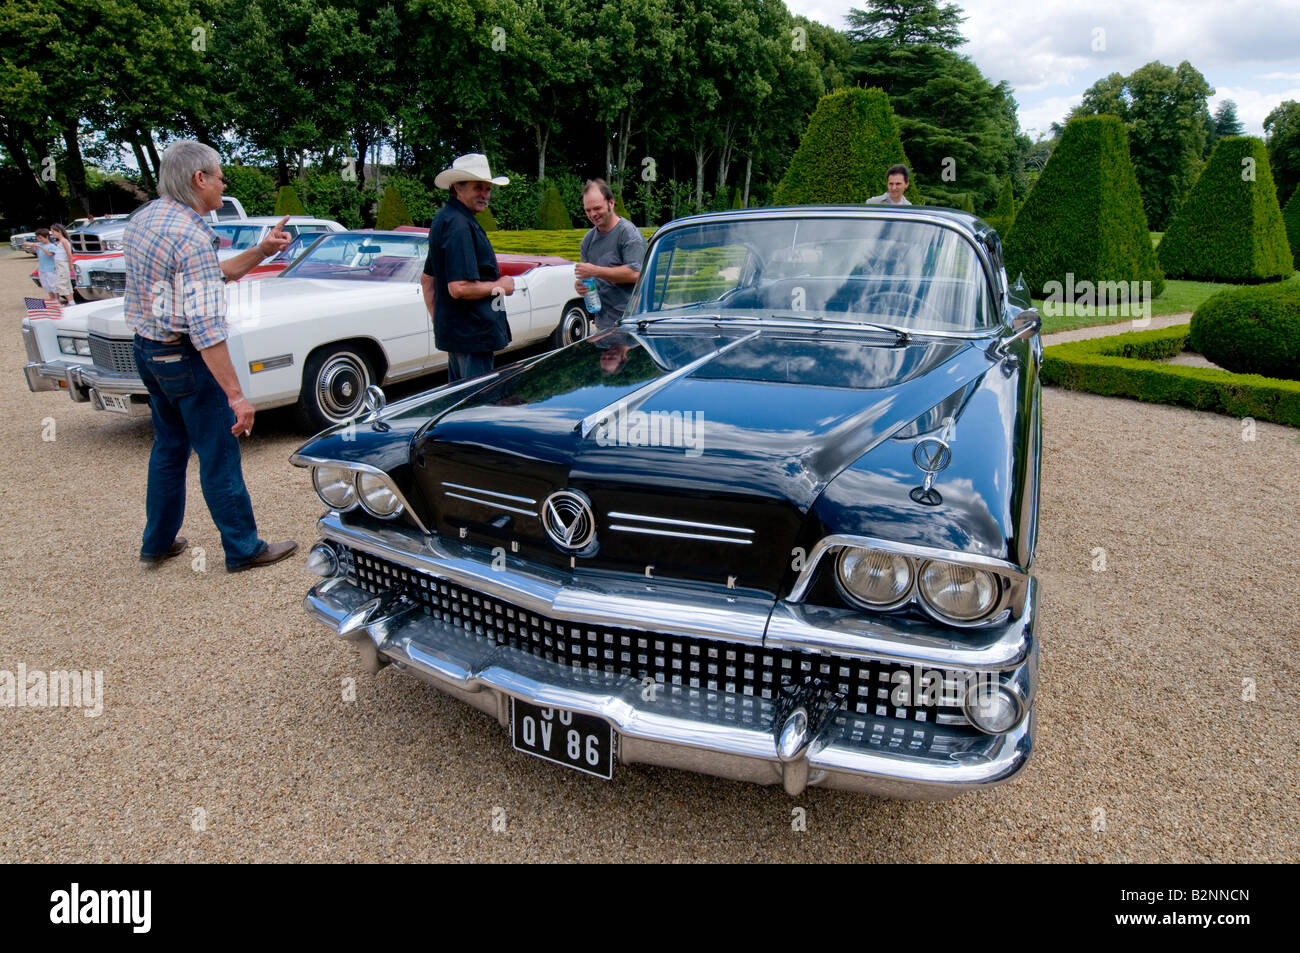 Buick Roadmaster 75 at American car show in the park of Chateau Azay-le-Ferron, Indre, France. Stock Photo